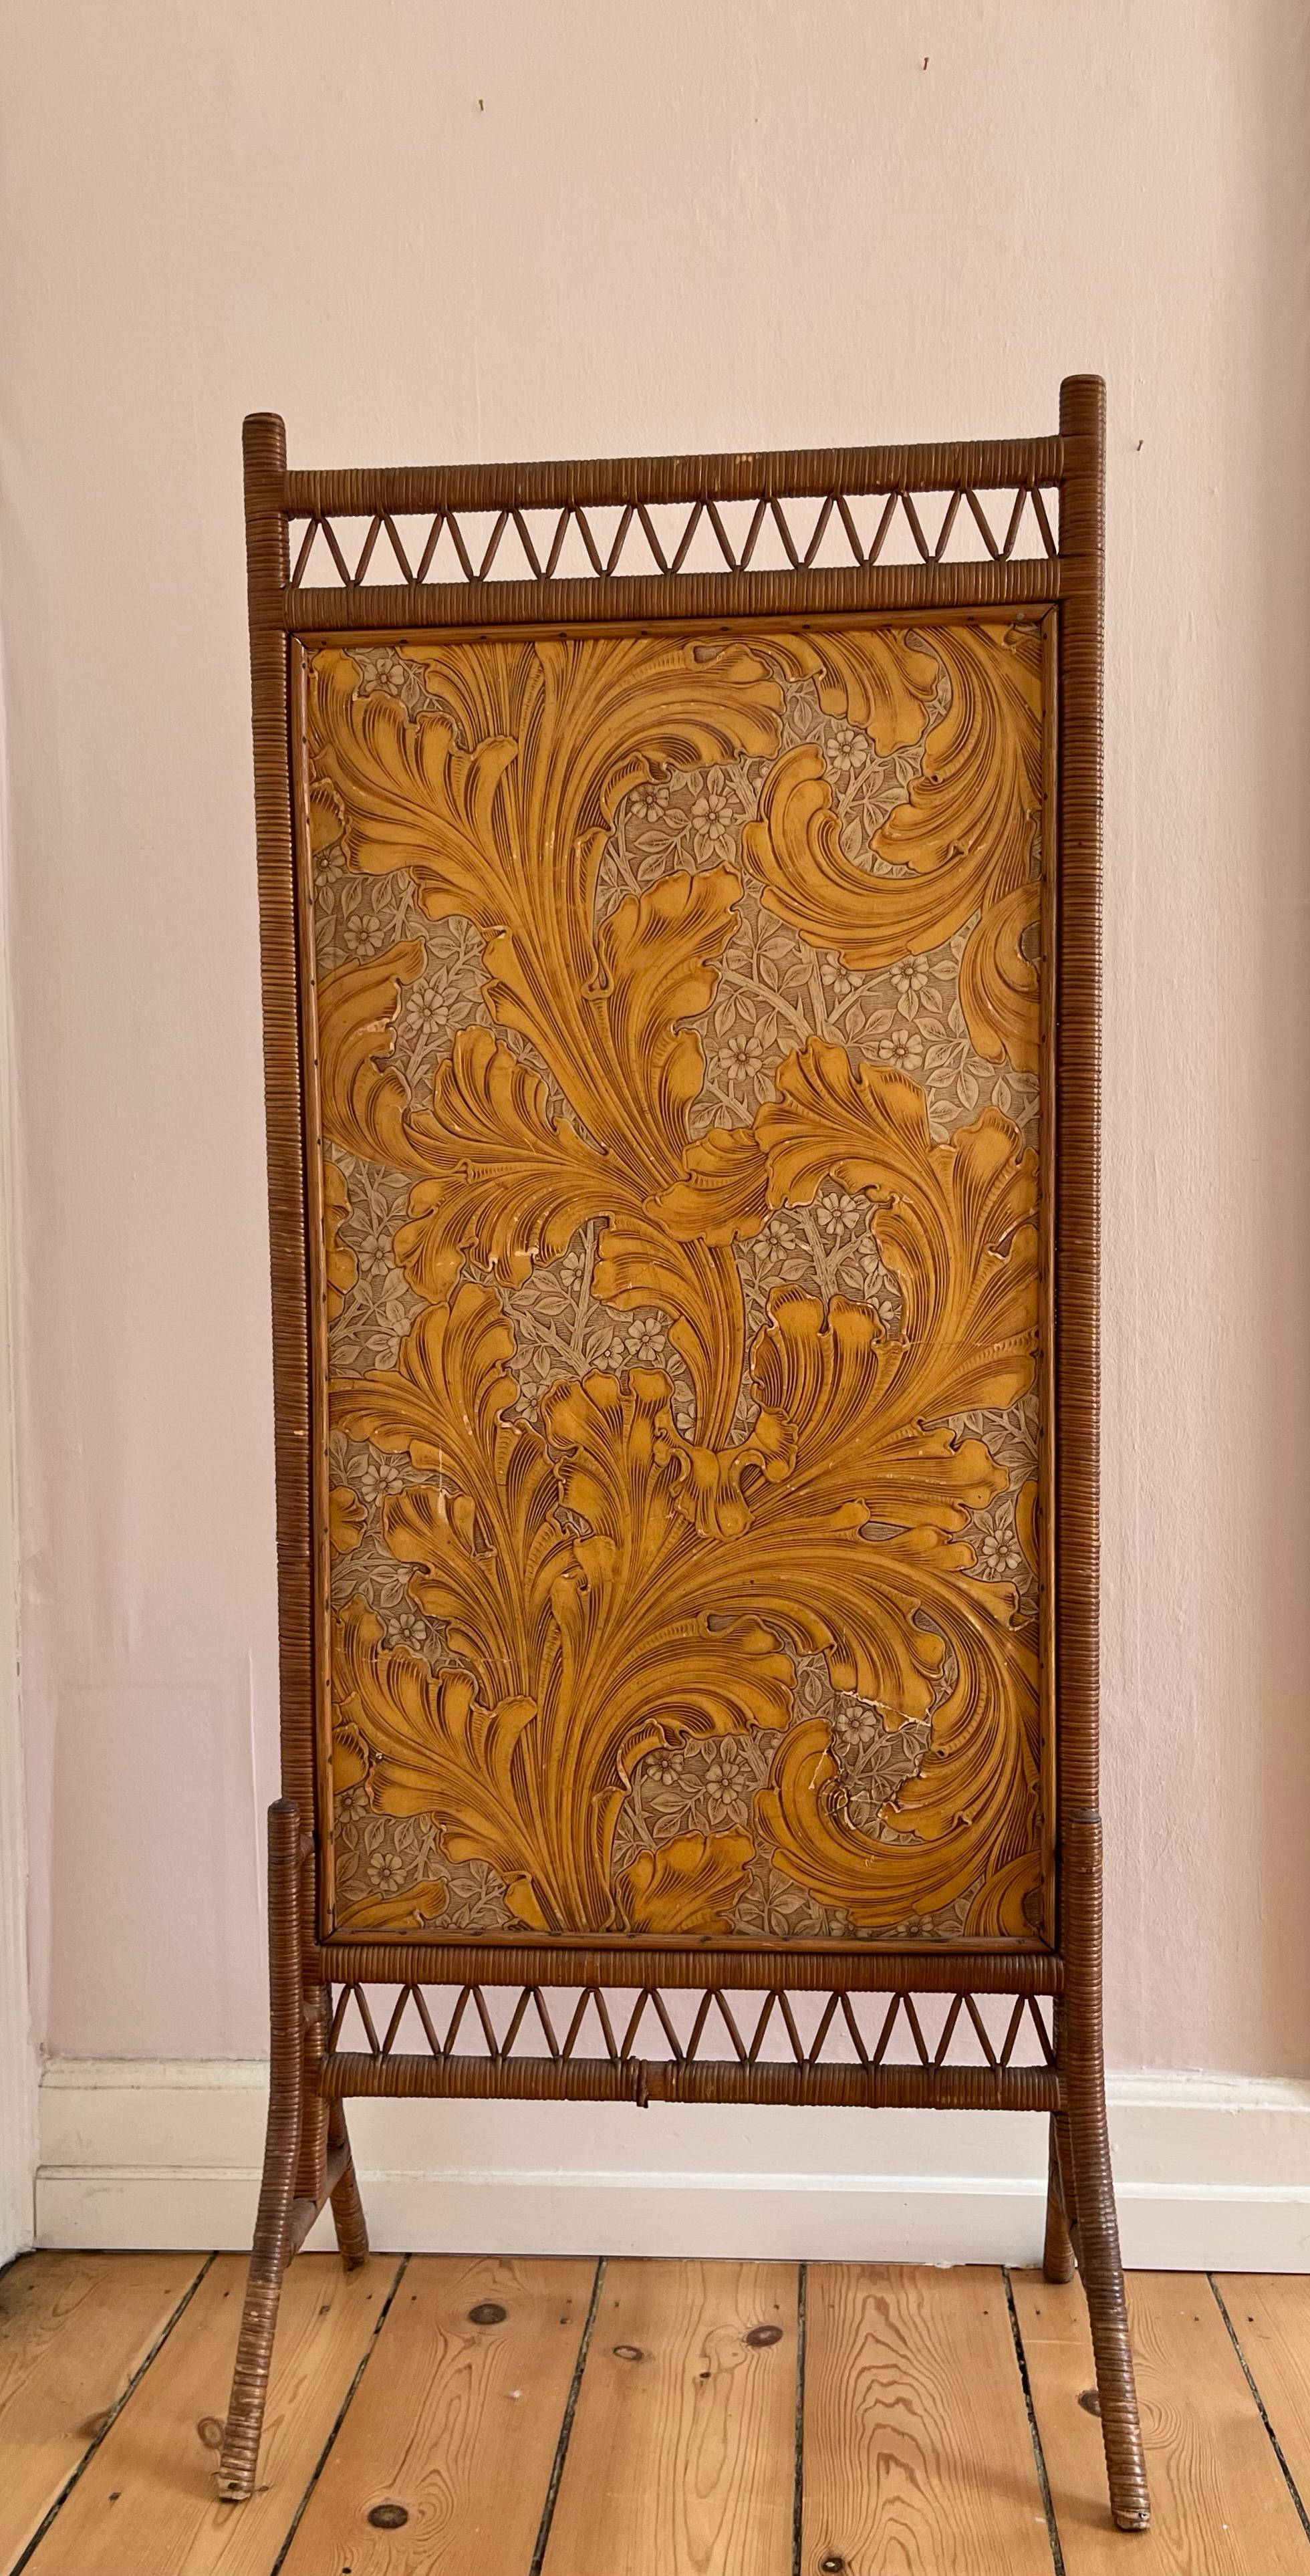 French 1930s/1940s screen in bamboo, rattan and wood.
Decorated in kind of a 3D/reliefic technique on one side and hessian on the other side, the wood frame is wrapped in rattan. This art deco screen or room divider was found in Paris. It has signs